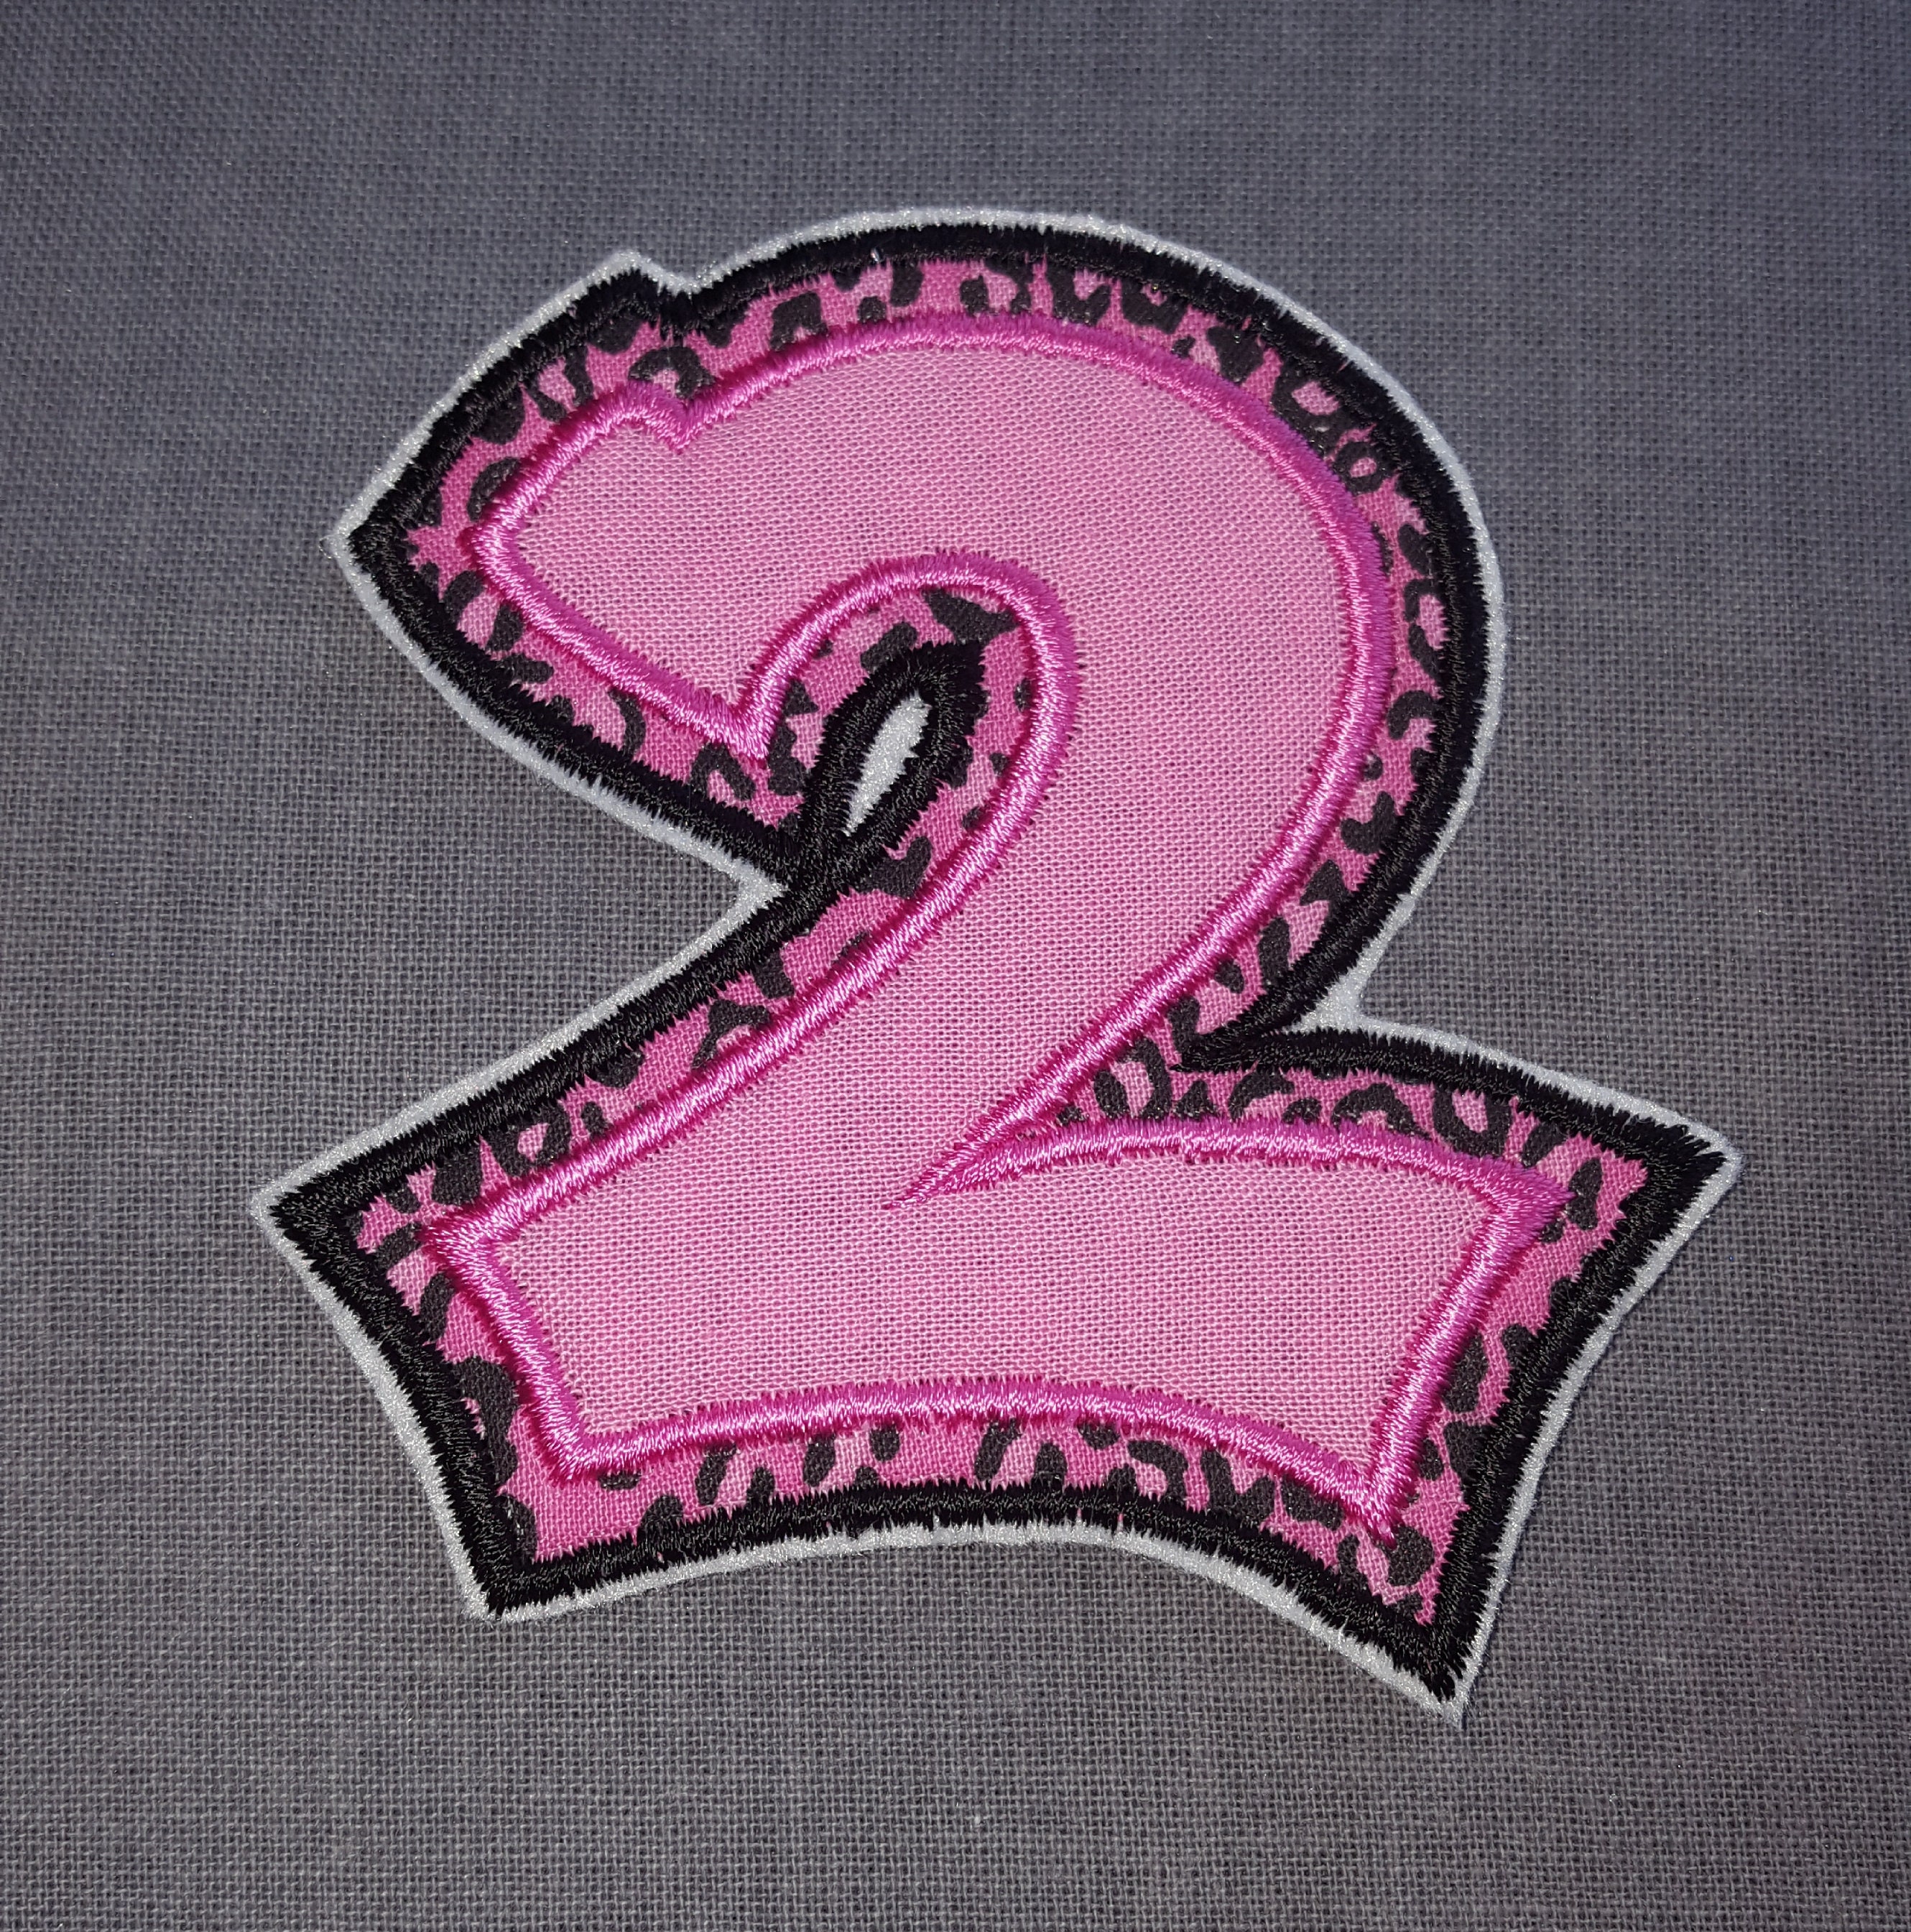 Pink Embroidered Iron on Letters Applique Patch,iron on Name Letters Patch  for T-shirt or Coat,decoration Embroidery Iron on Patches 